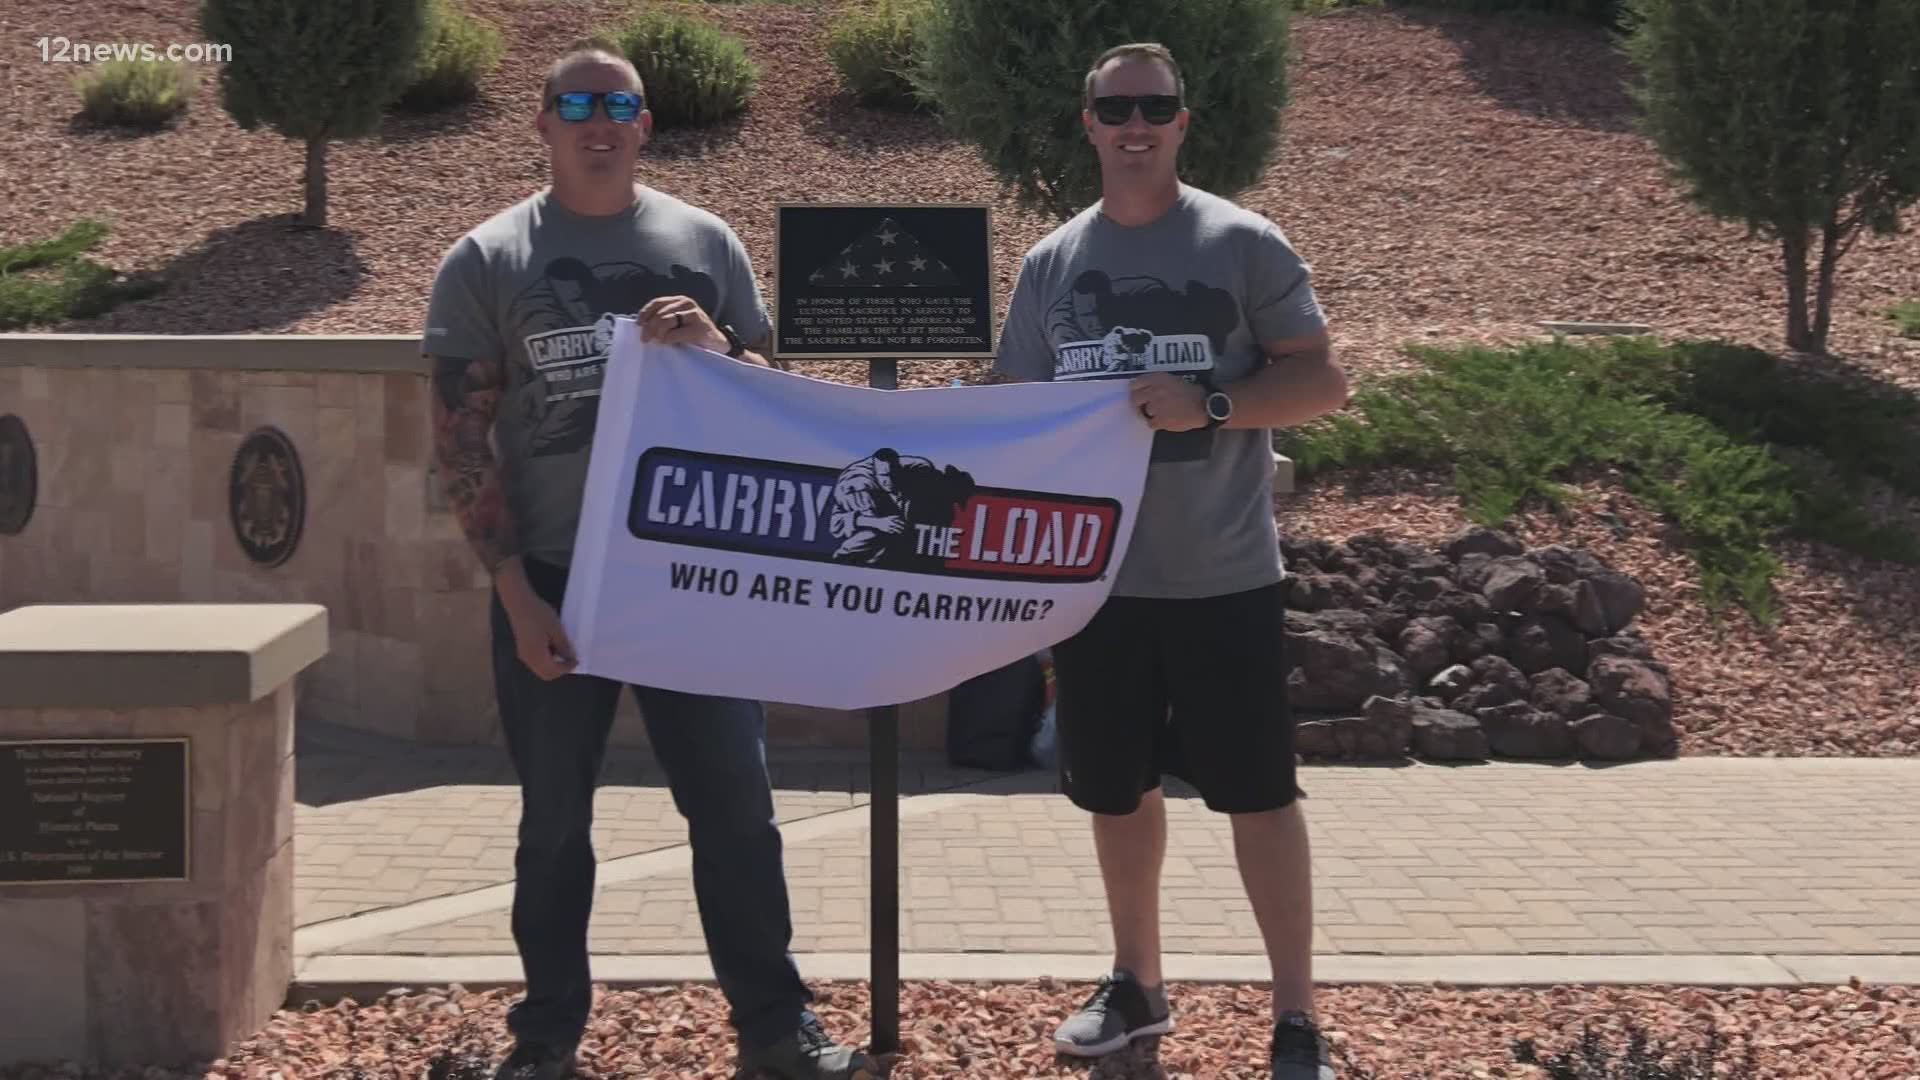 Carry the Load is a national movement making its way from Seattle to Dallas. It honors those killed in action and reminds us about the true meaning of Memorial Day.